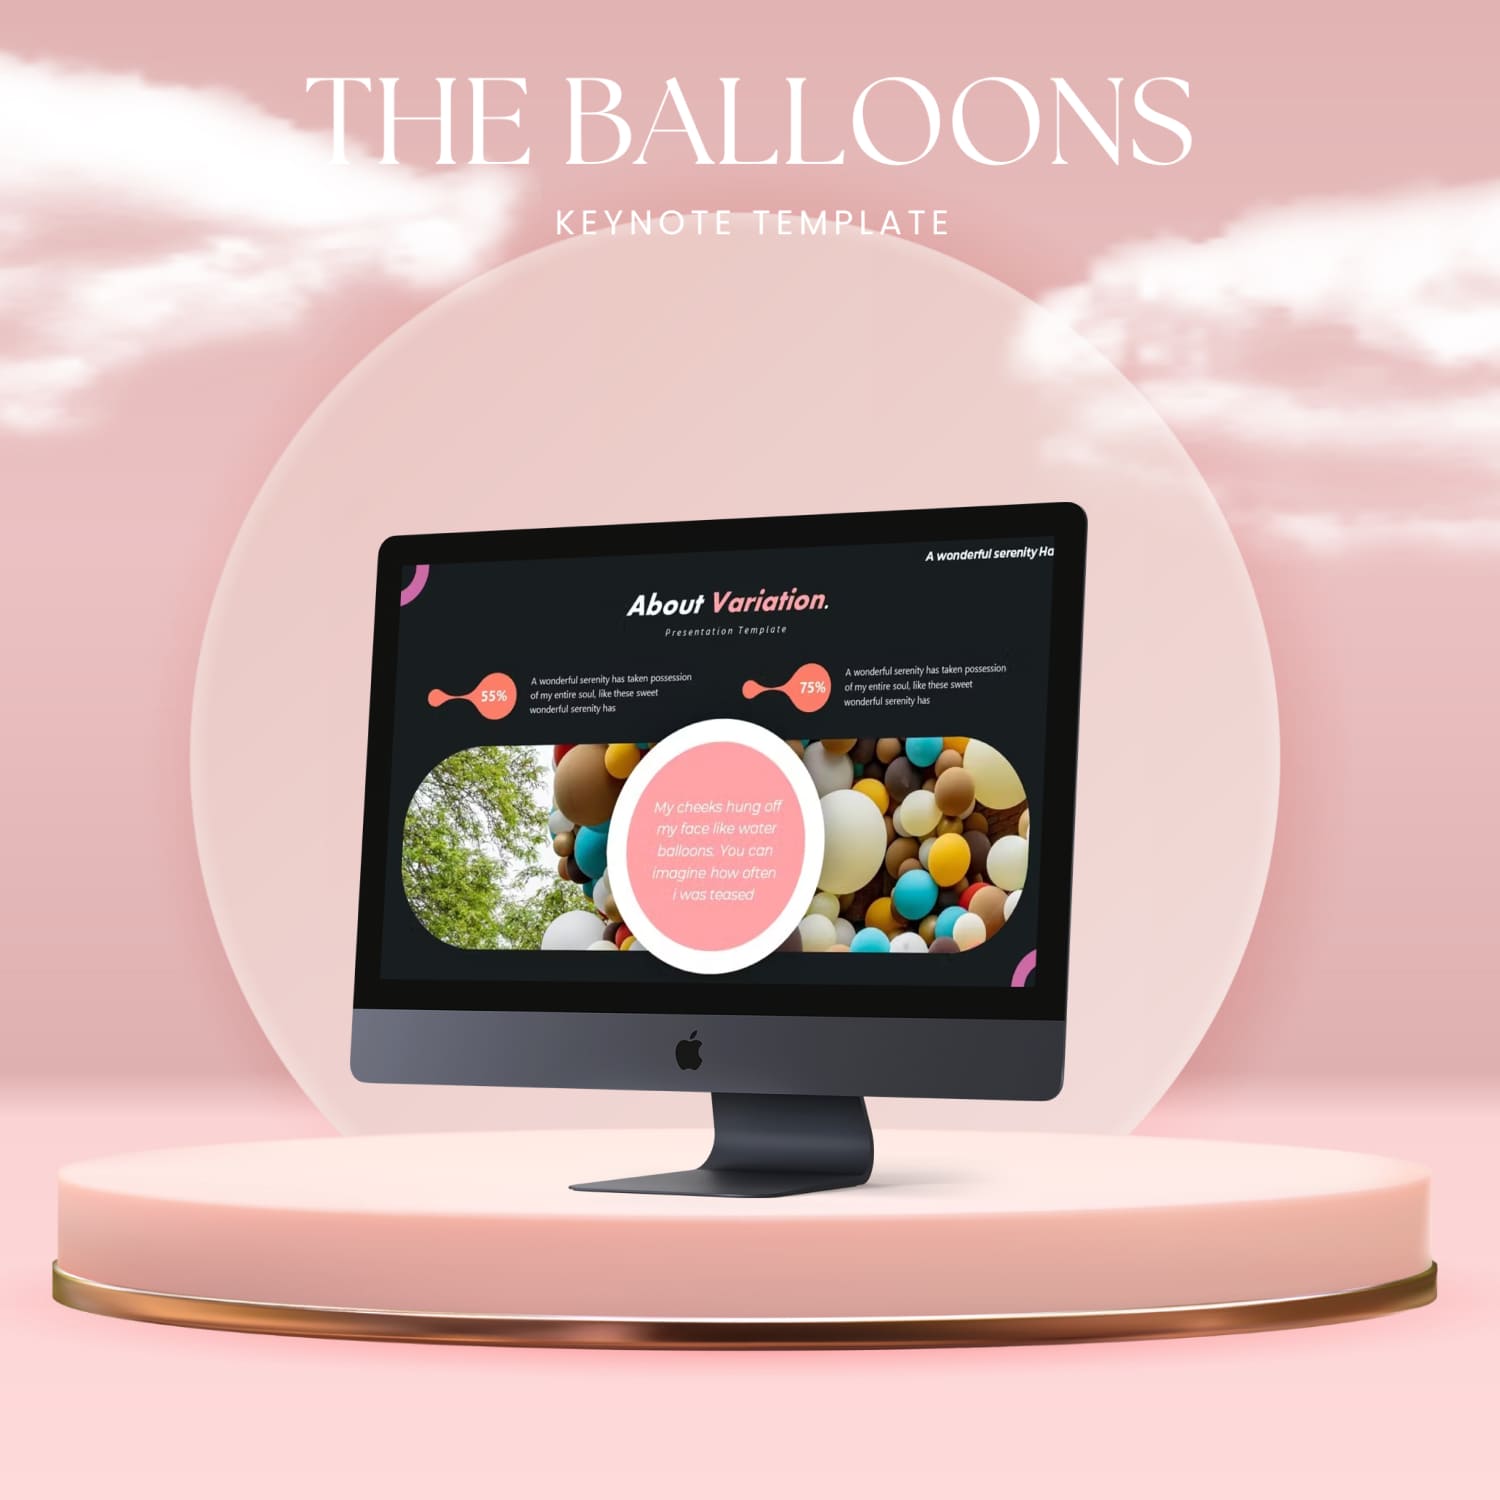 Images of adorable balloons presentation template slides on PC.